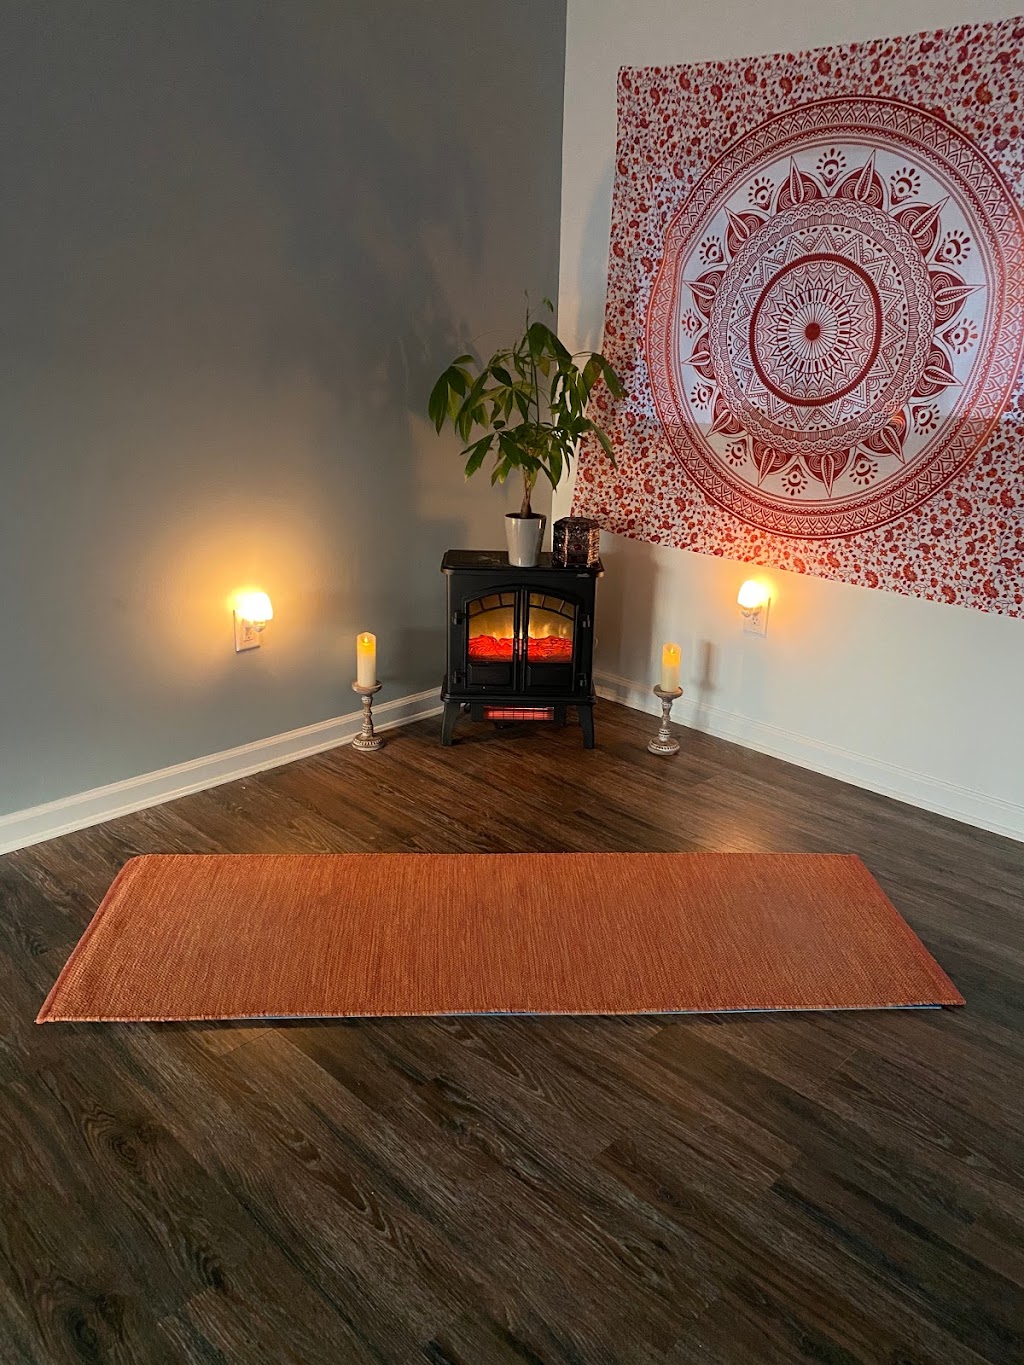 Salt Of The Earth Yoga | 426 S Country Rd Suite 2, Brookhaven, NY 11719 | Phone: (631) 655-8627